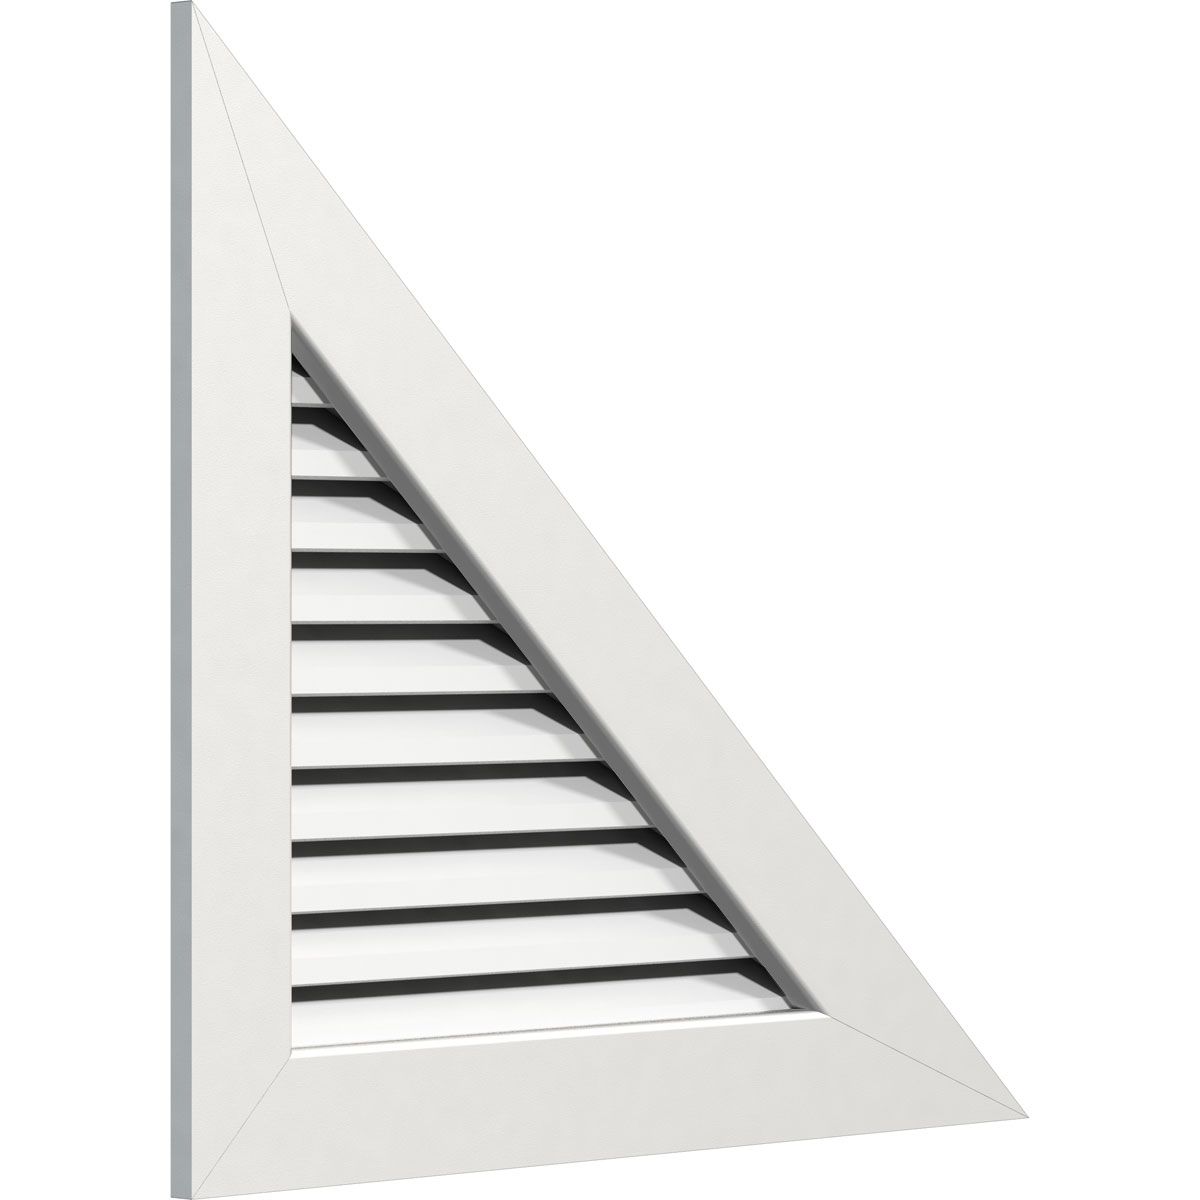 Ekena Millwork 38"W x 28 1/2"H Right Triangle Gable Vent - Right Side (47"W x 35 1/4"H Frame Size) 9/12 Pitch Functional, PVC Gable Vent with 1" x 4" Flat Trim Frame - image 2 of 14